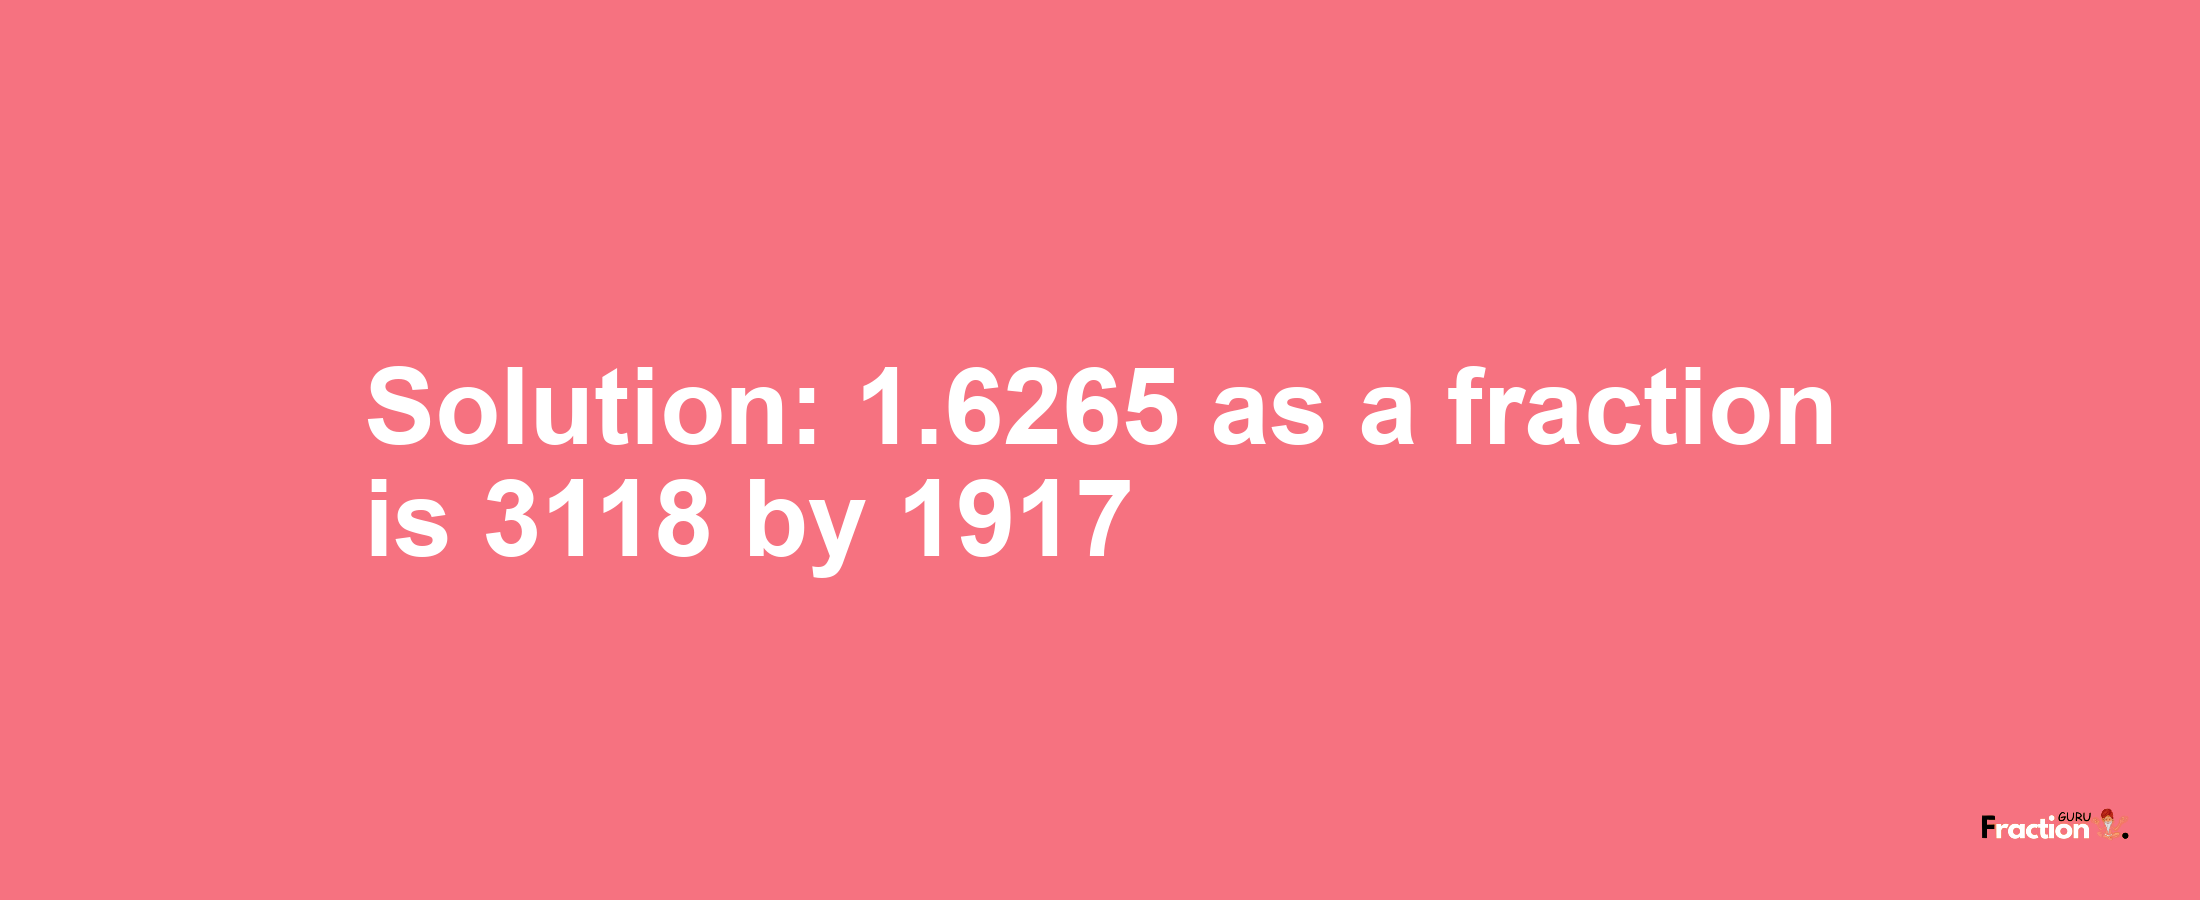 Solution:1.6265 as a fraction is 3118/1917